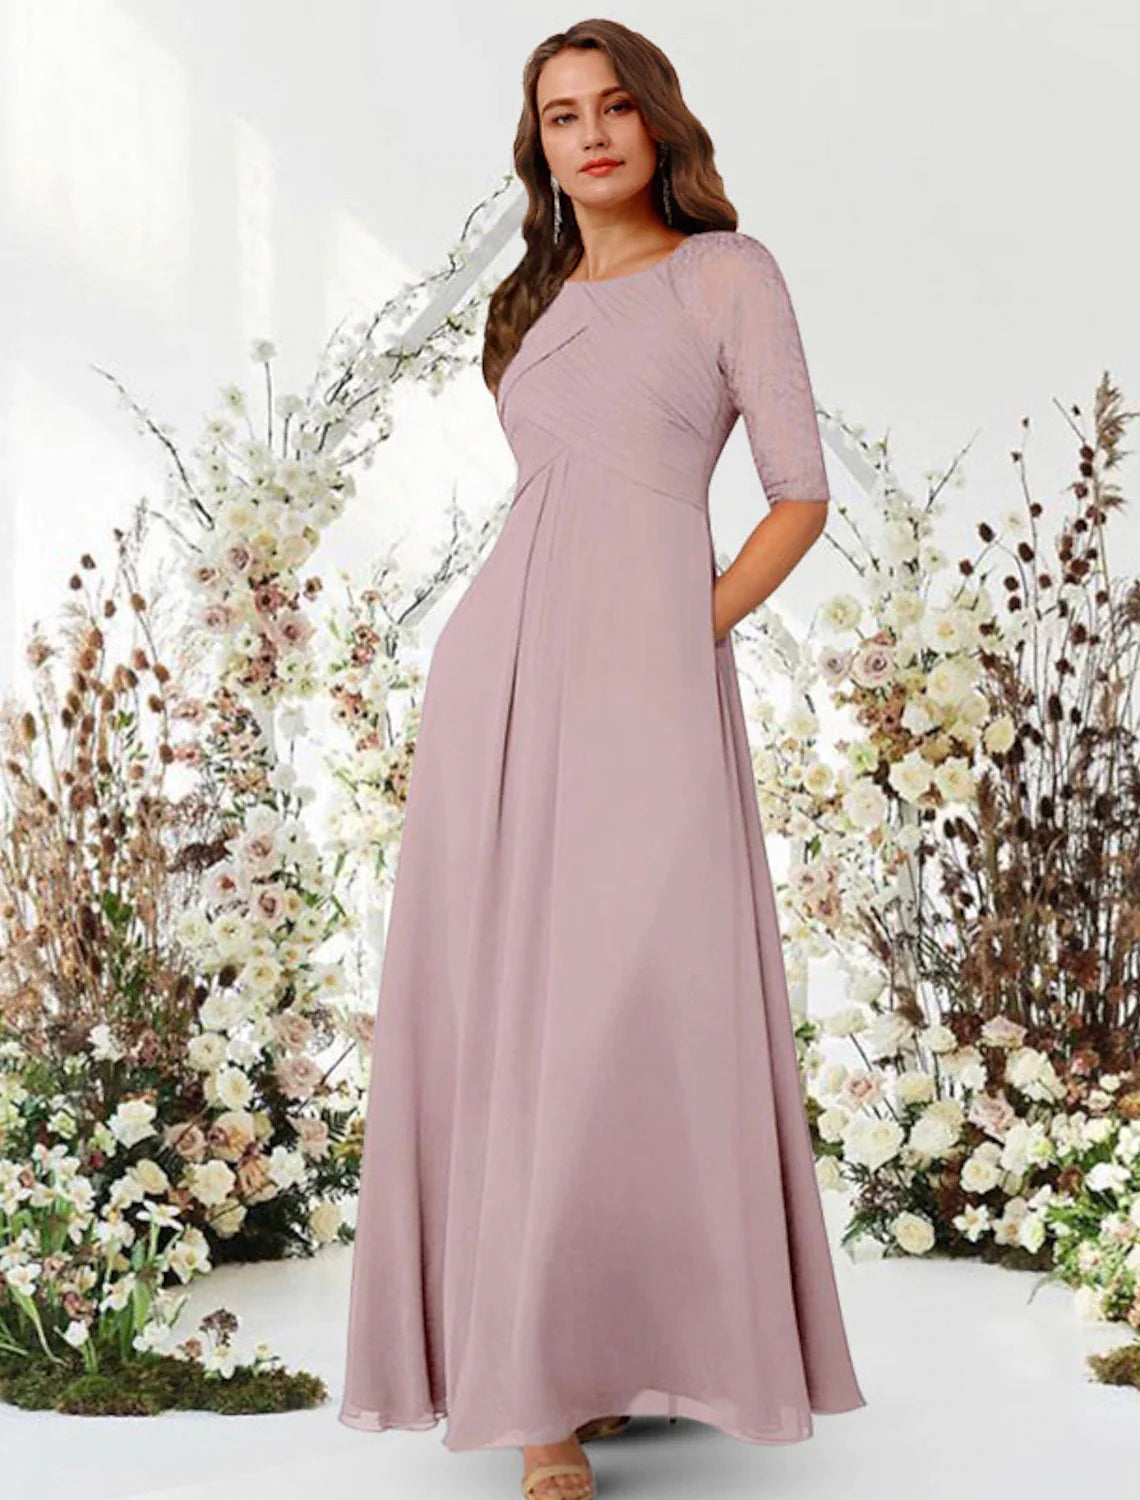 A-Line Evening Gown Elegant Dress Wedding Guest Floor Length Half Sleeve Jewel Neck Chiffon with Pleats Ruched